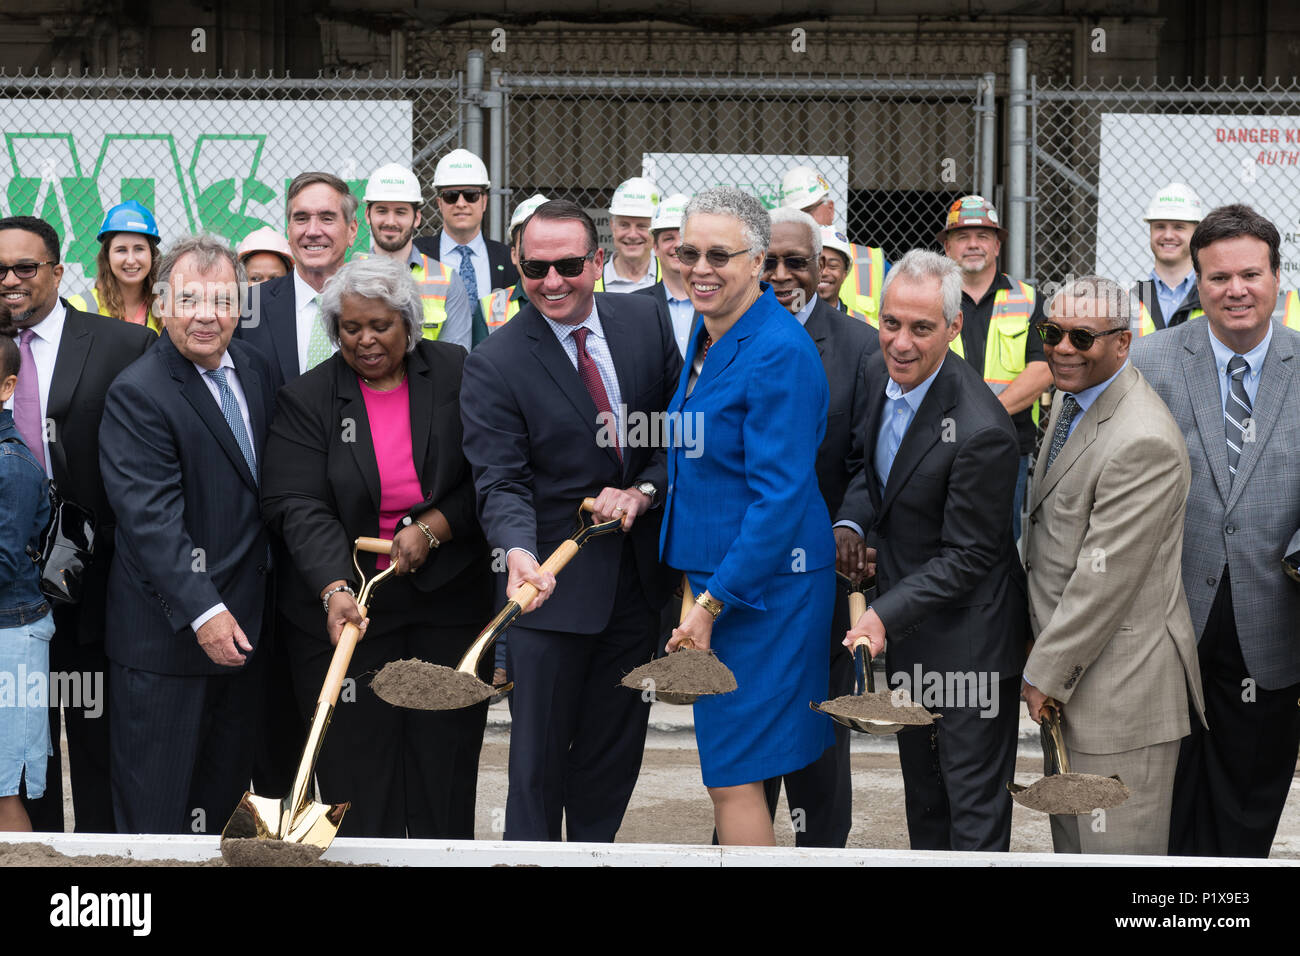 Attendees at the groundbreaking ceremony for the redevelopment of Cook County Hospital including Toni Preckwinkle and Rahm Emanuel Stock Photo